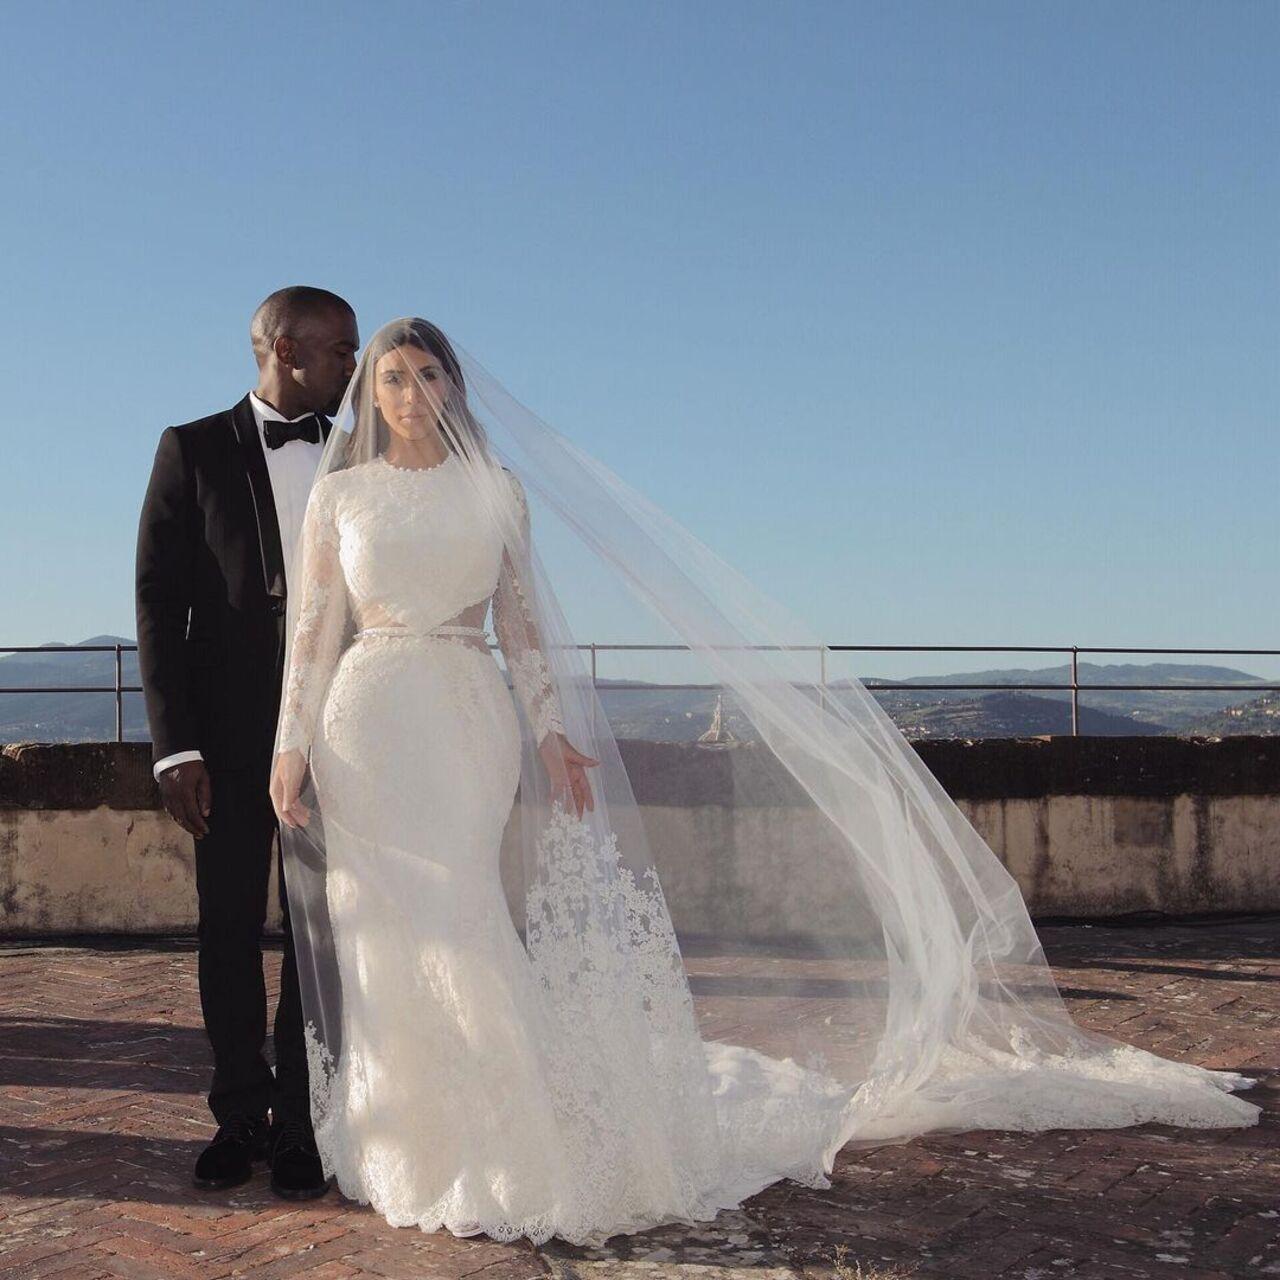 Kim Kardashian and Kanye West tied the knot in May 2014. The fairytale ceremony took place in Italy. Kim wore a custom Givenchy haute couture designed by Riccardo Tisci. It was a full-sleeved mermaid gown with a cut-out at the waist that doubled as a belt. She paired it with an extensive veil. 